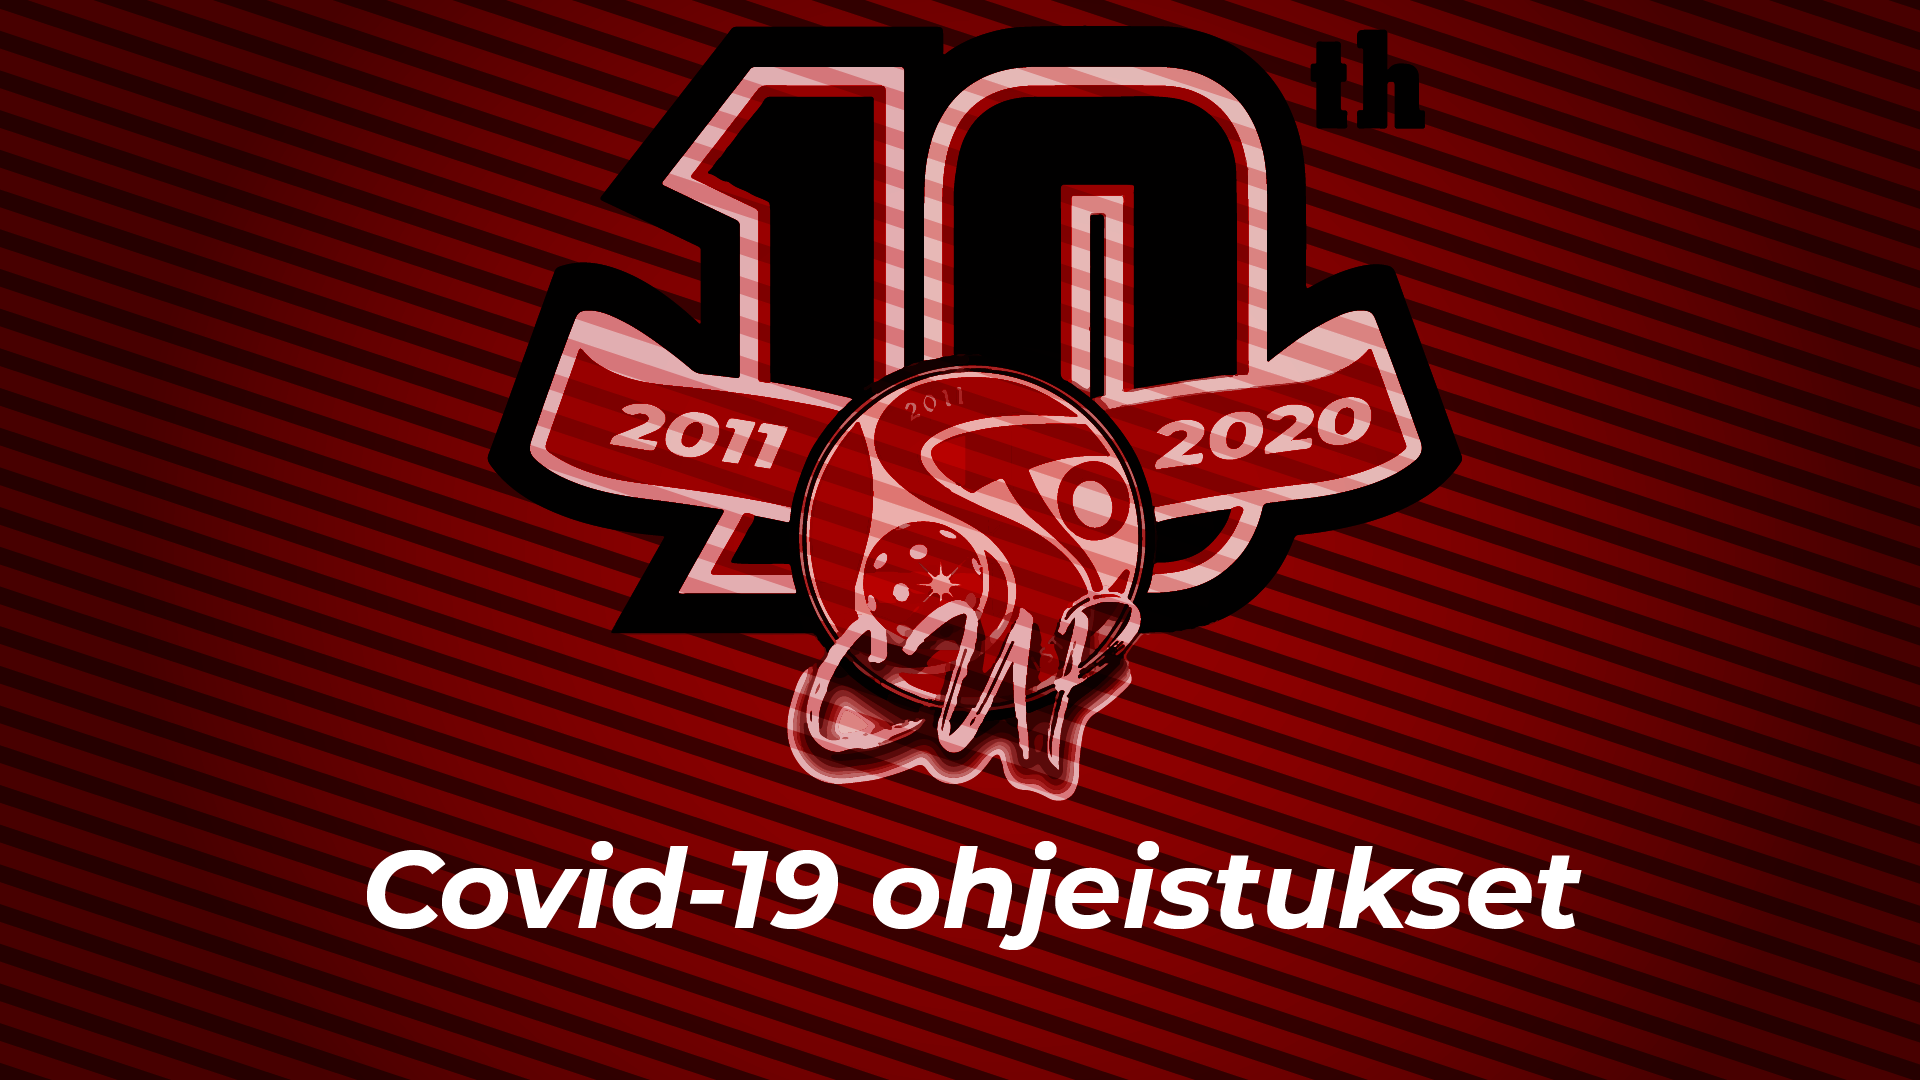 Read more about the article Covid-19 ohjeistukset